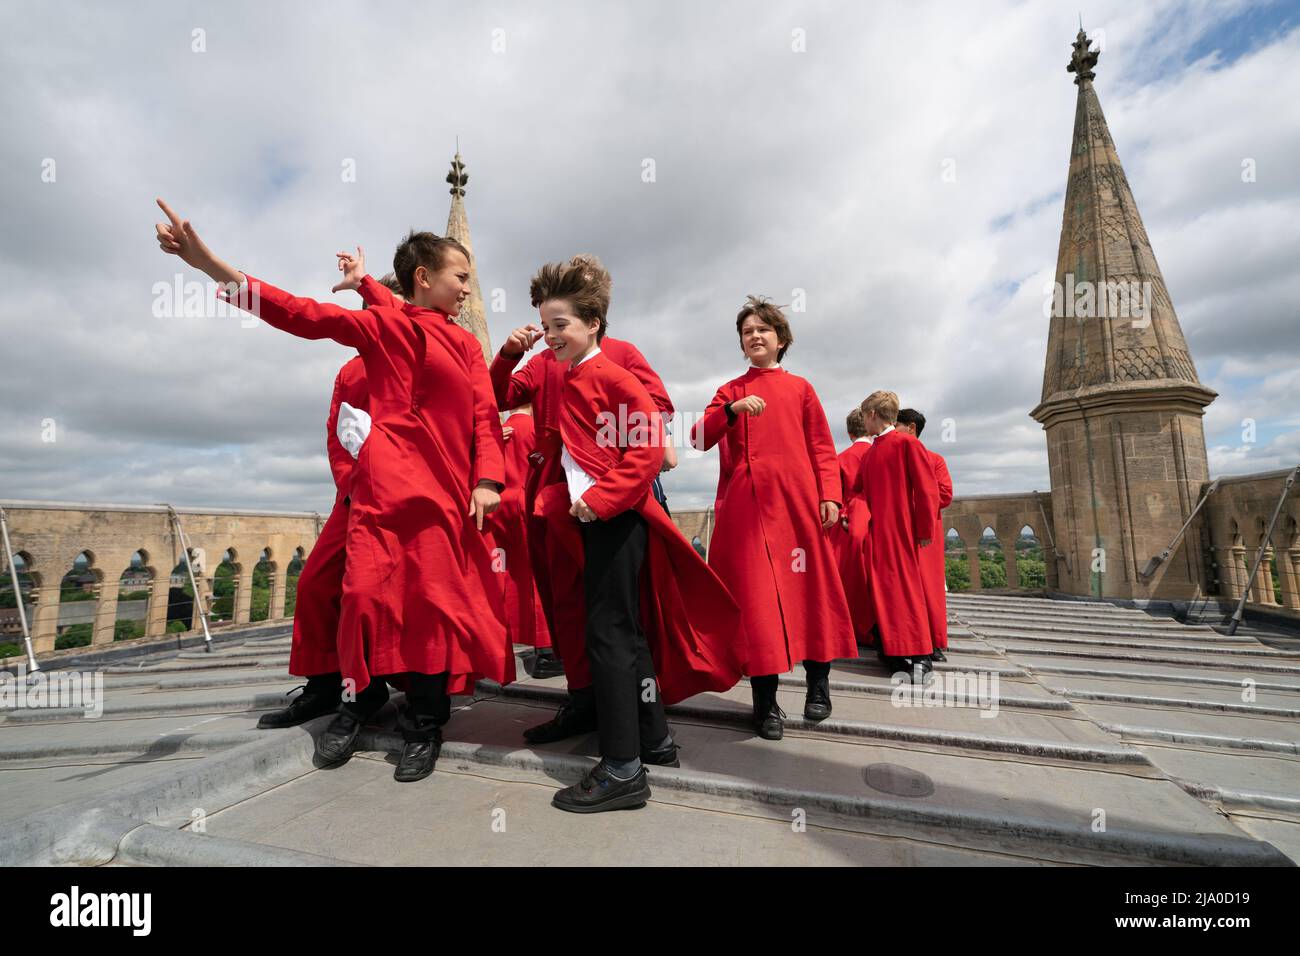 Choristers from the Choir of St John's College, Cambridge, take in the view before performing the Ascension Day carol from the top of the Chapel Tower at St John's College, a custom dating back to 1902. Picture date: Thursday May 26, 2022. Every year on Ascension Day the Choir ascends the 163ft Chapel Tower and sings the Ascension Day carol. This custom dates from 1902 and was begun by the then Director of Music, Cyril Rootham, following a conversation with Sir Joseph Larmor. Sir Jospeh was insistent that a choir singing from the tower would not be heard from the ground. Rootham was keen to pr Stock Photo